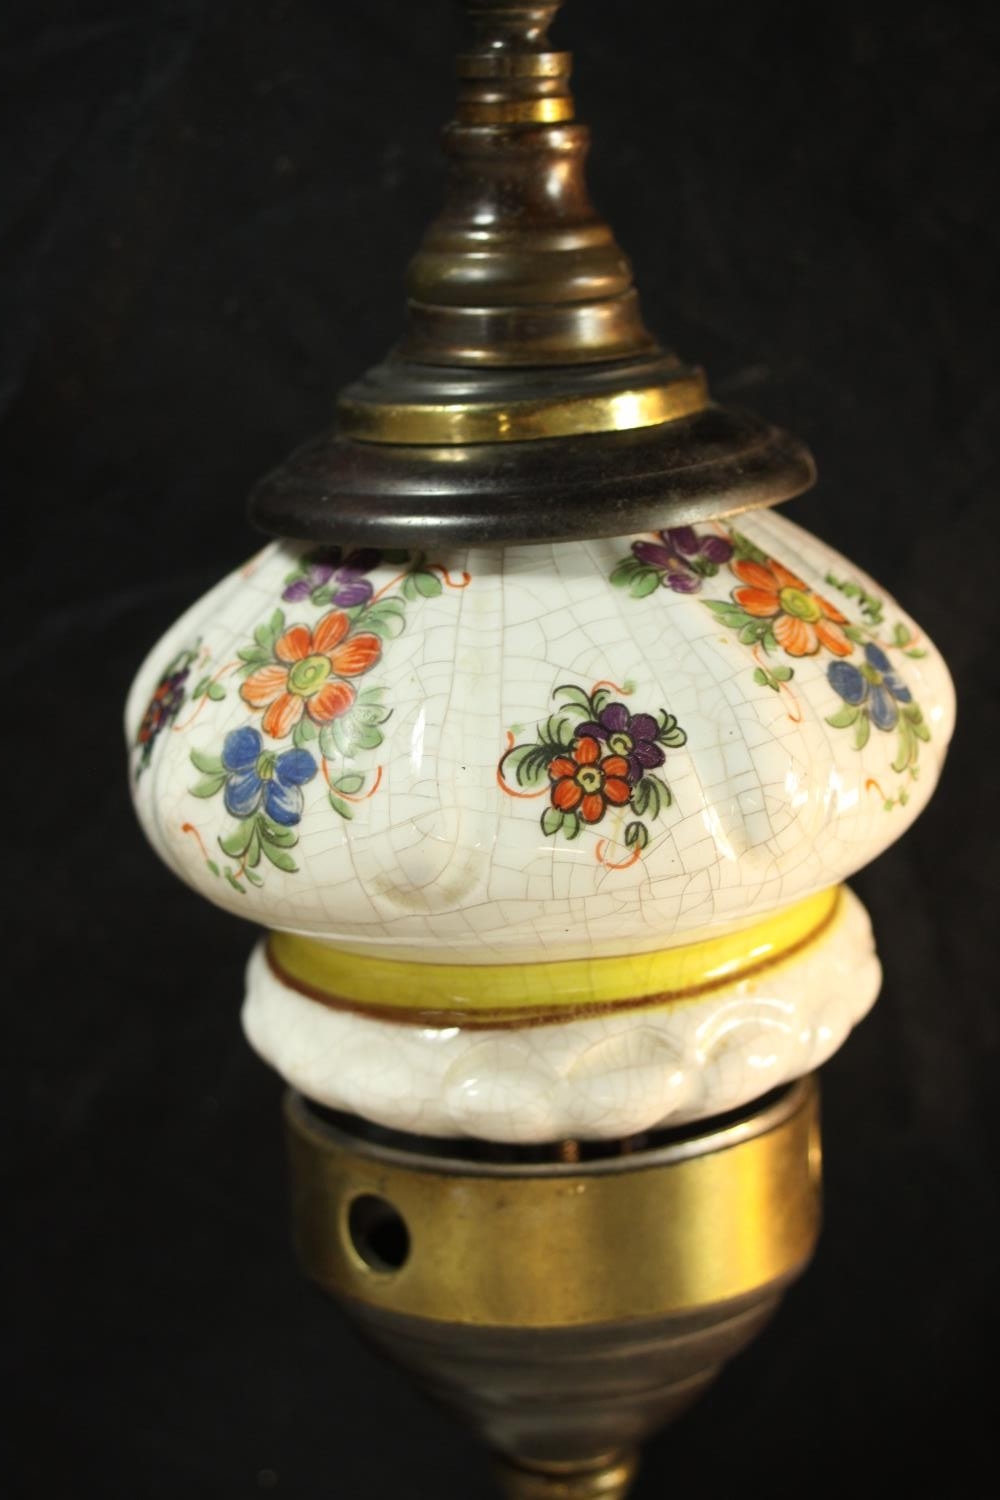 An early 20th century porcelain and brass ceiling pendant light, decorted with sprays of flowers. - Image 3 of 5